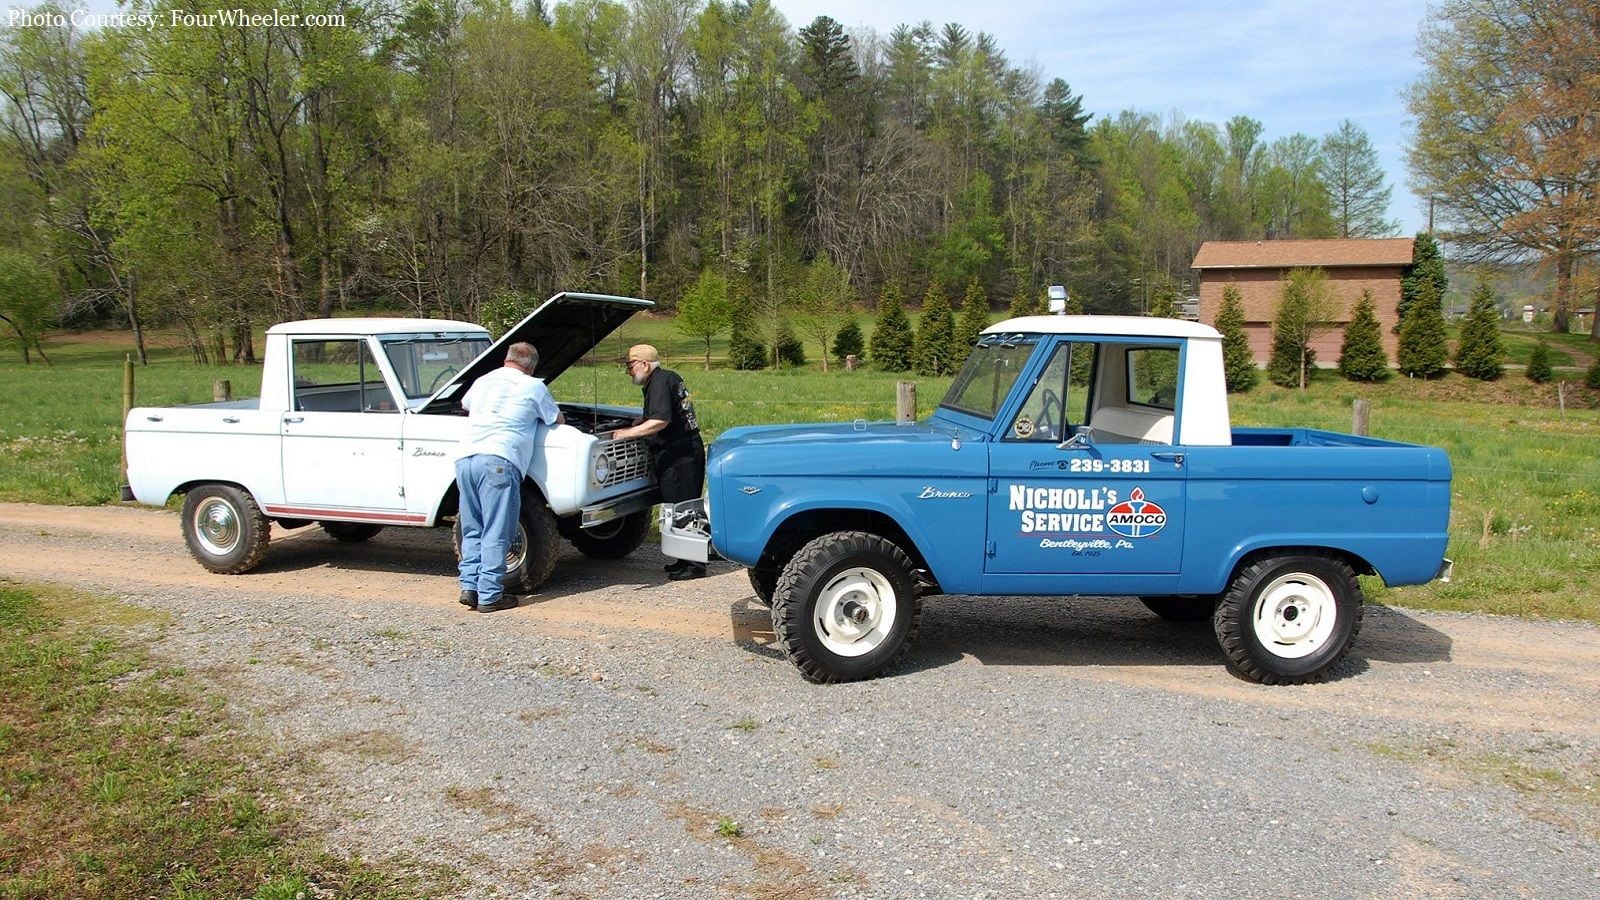 Early Bronco Pays Tribute To Small Town Family Filling Station Photos Ford Trucks